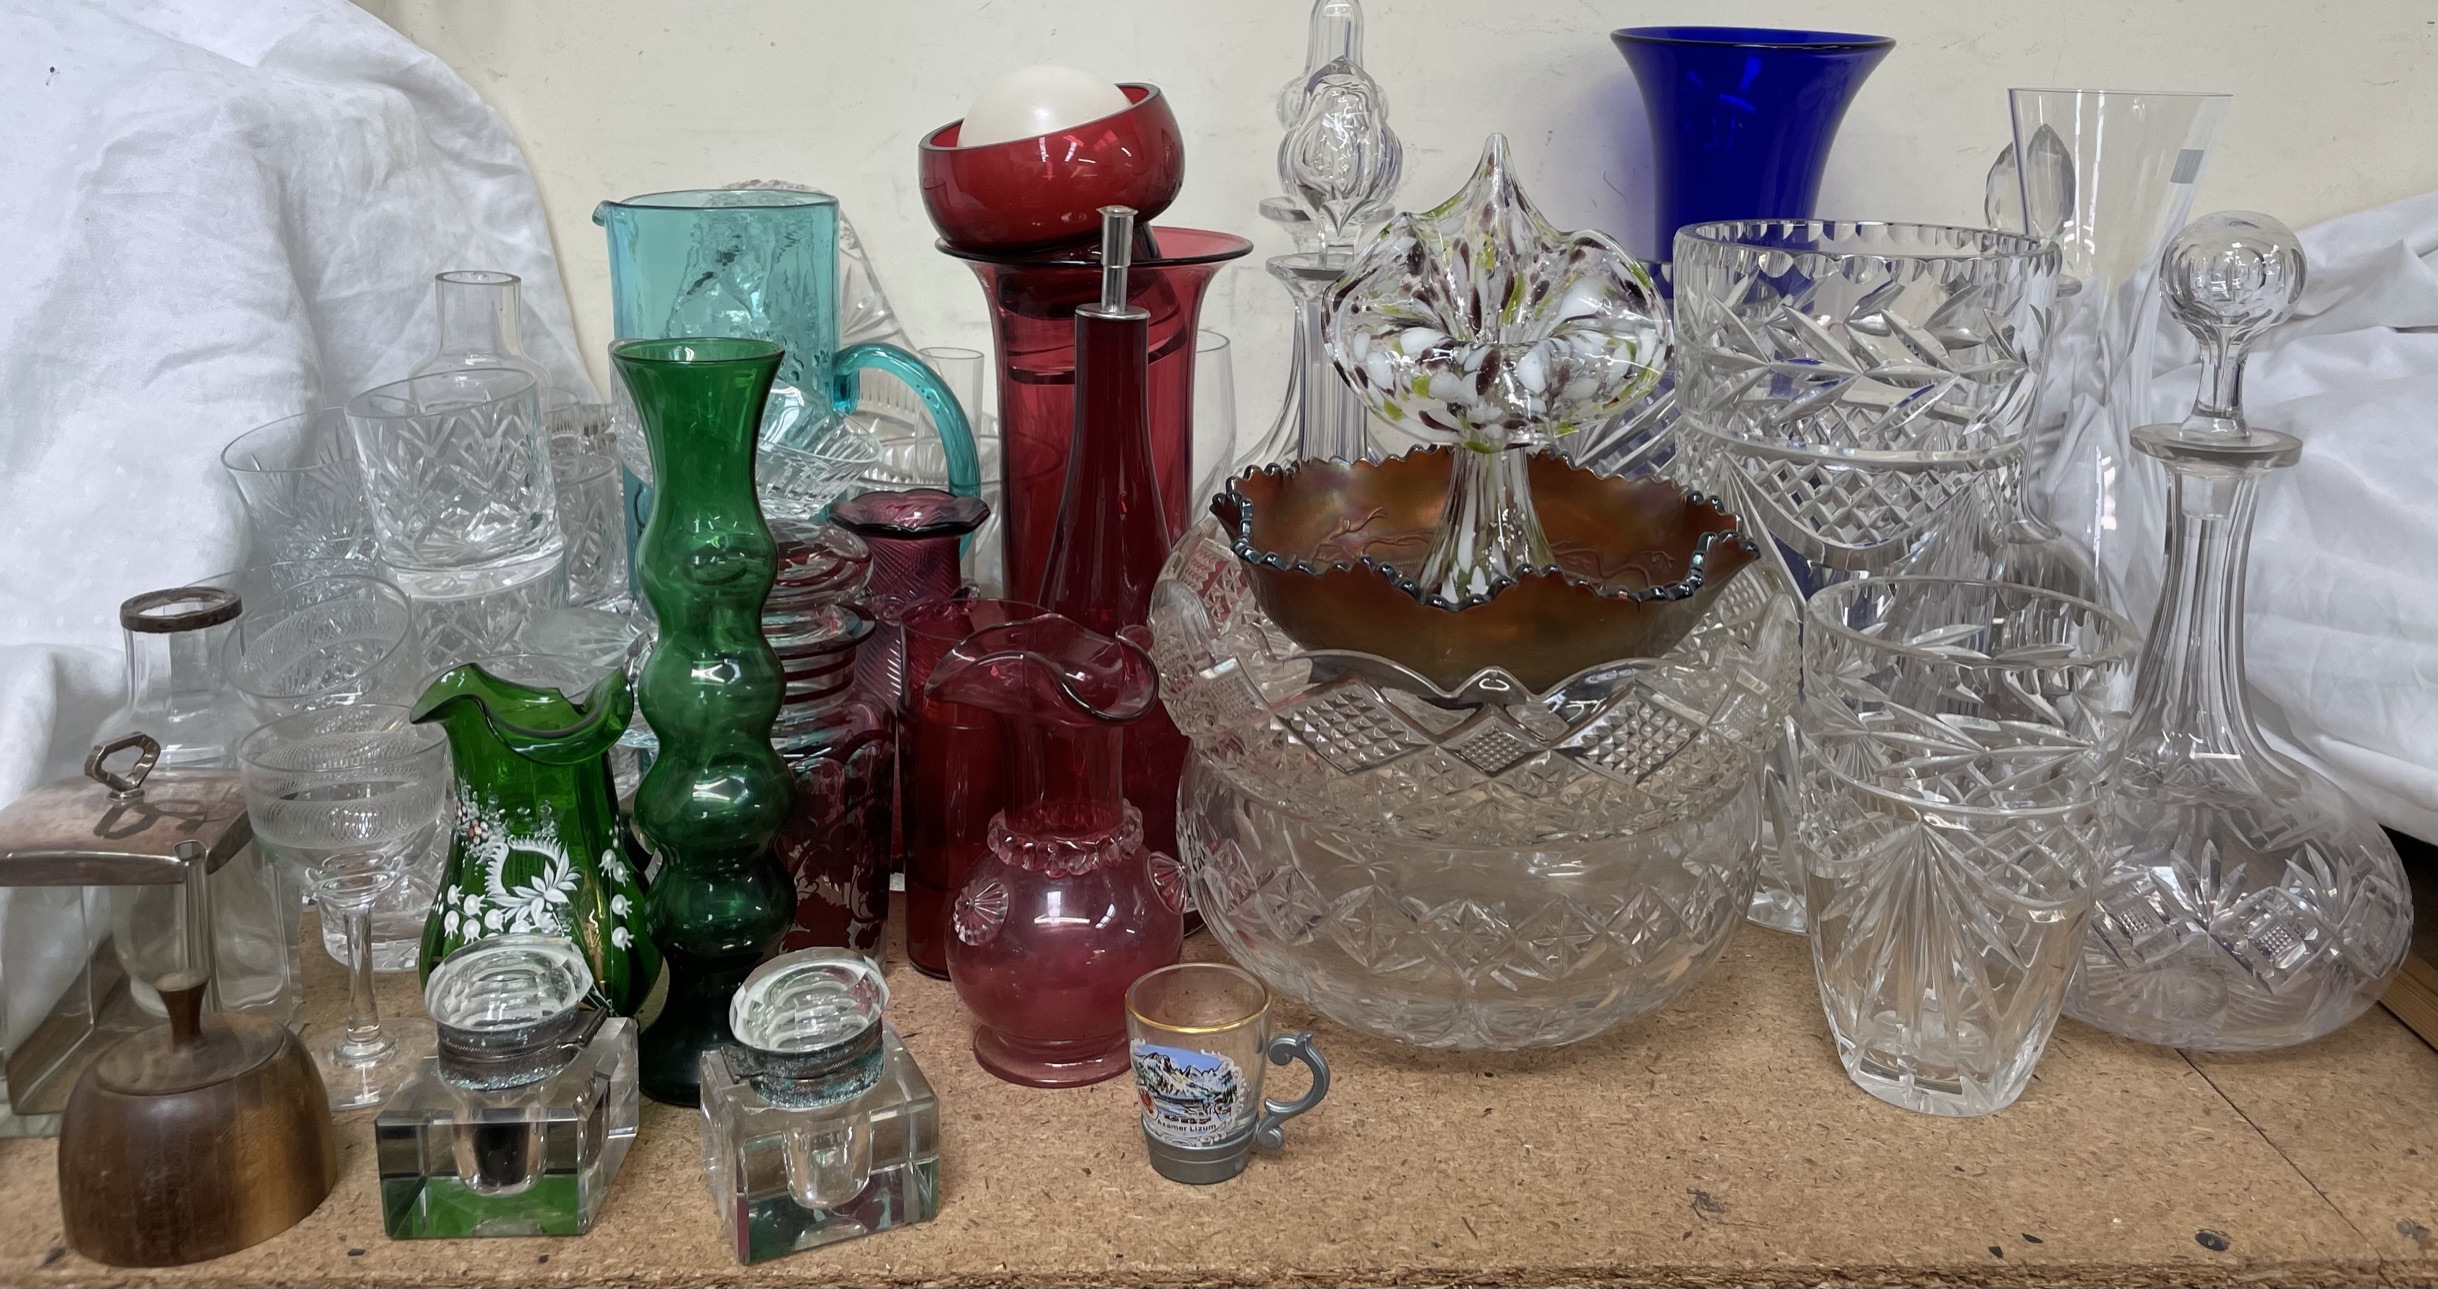 Cranberry glass vases together with glass decanters, drinking glasses,